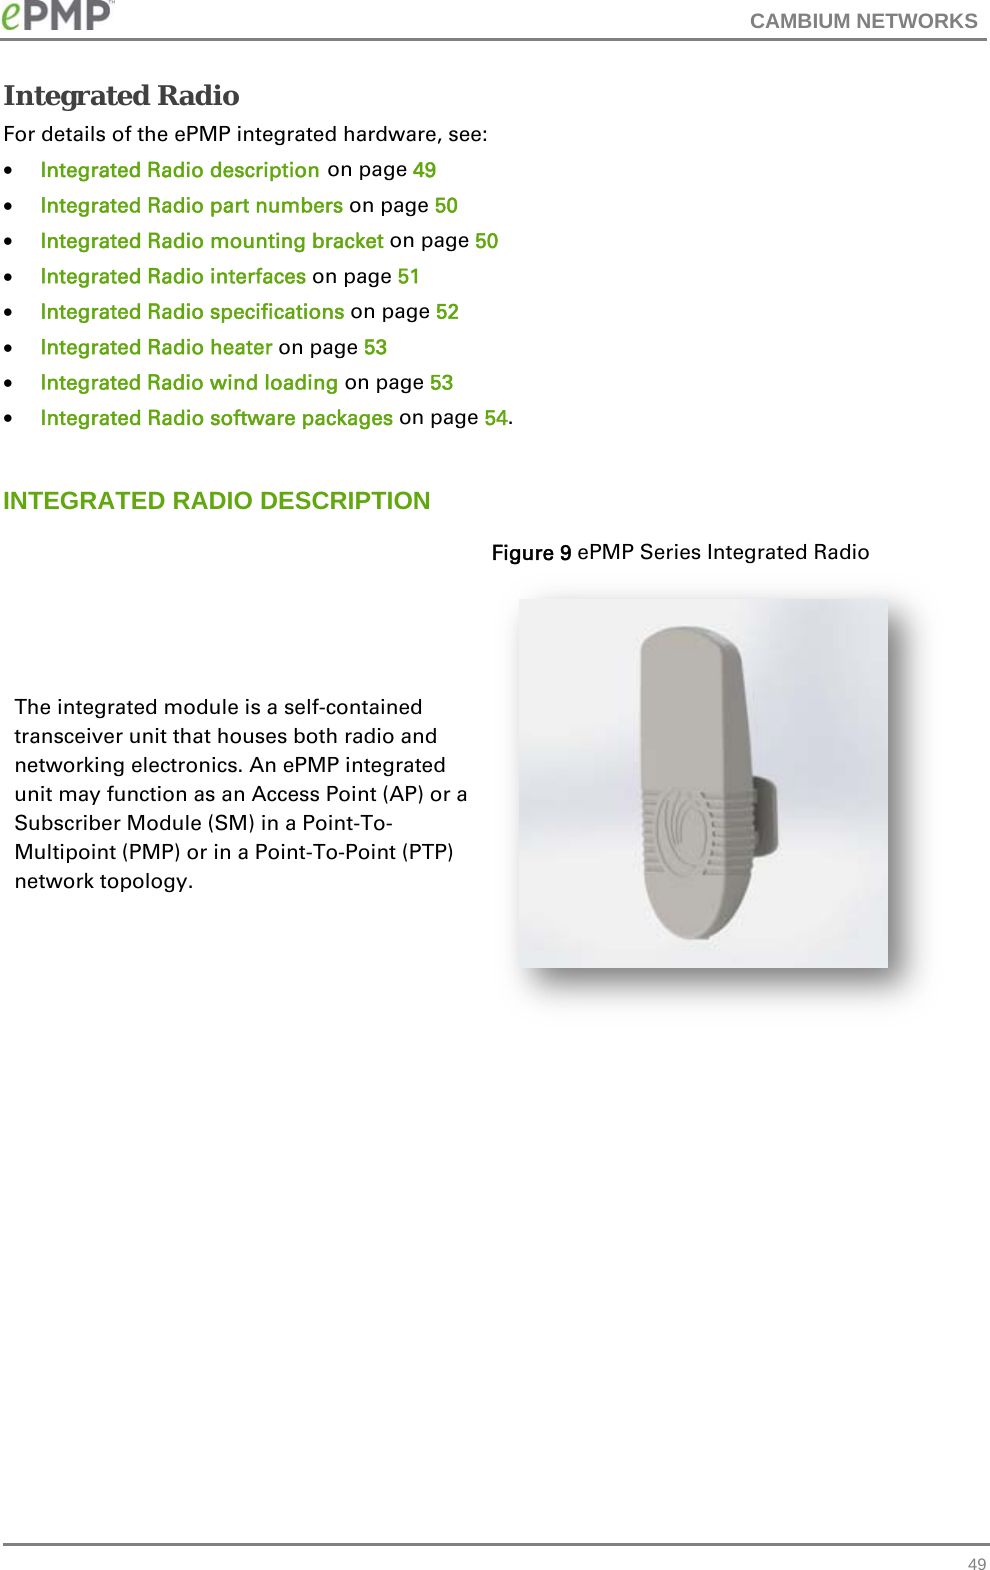 CAMBIUM NETWORKS   49Integrated Radio For details of the ePMP integrated hardware, see:  Integrated Radio description on page 49  Integrated Radio part numbers on page 50  Integrated Radio mounting bracket on page 50  Integrated Radio interfaces on page 51  Integrated Radio specifications on page 52  Integrated Radio heater on page 53  Integrated Radio wind loading on page 53  Integrated Radio software packages on page 54.  INTEGRATED RADIO DESCRIPTION The integrated module is a self-contained transceiver unit that houses both radio and networking electronics. An ePMP integrated unit may function as an Access Point (AP) or a Subscriber Module (SM) in a Point-To-Multipoint (PMP) or in a Point-To-Point (PTP) network topology. Figure 9 ePMP Series Integrated Radio   